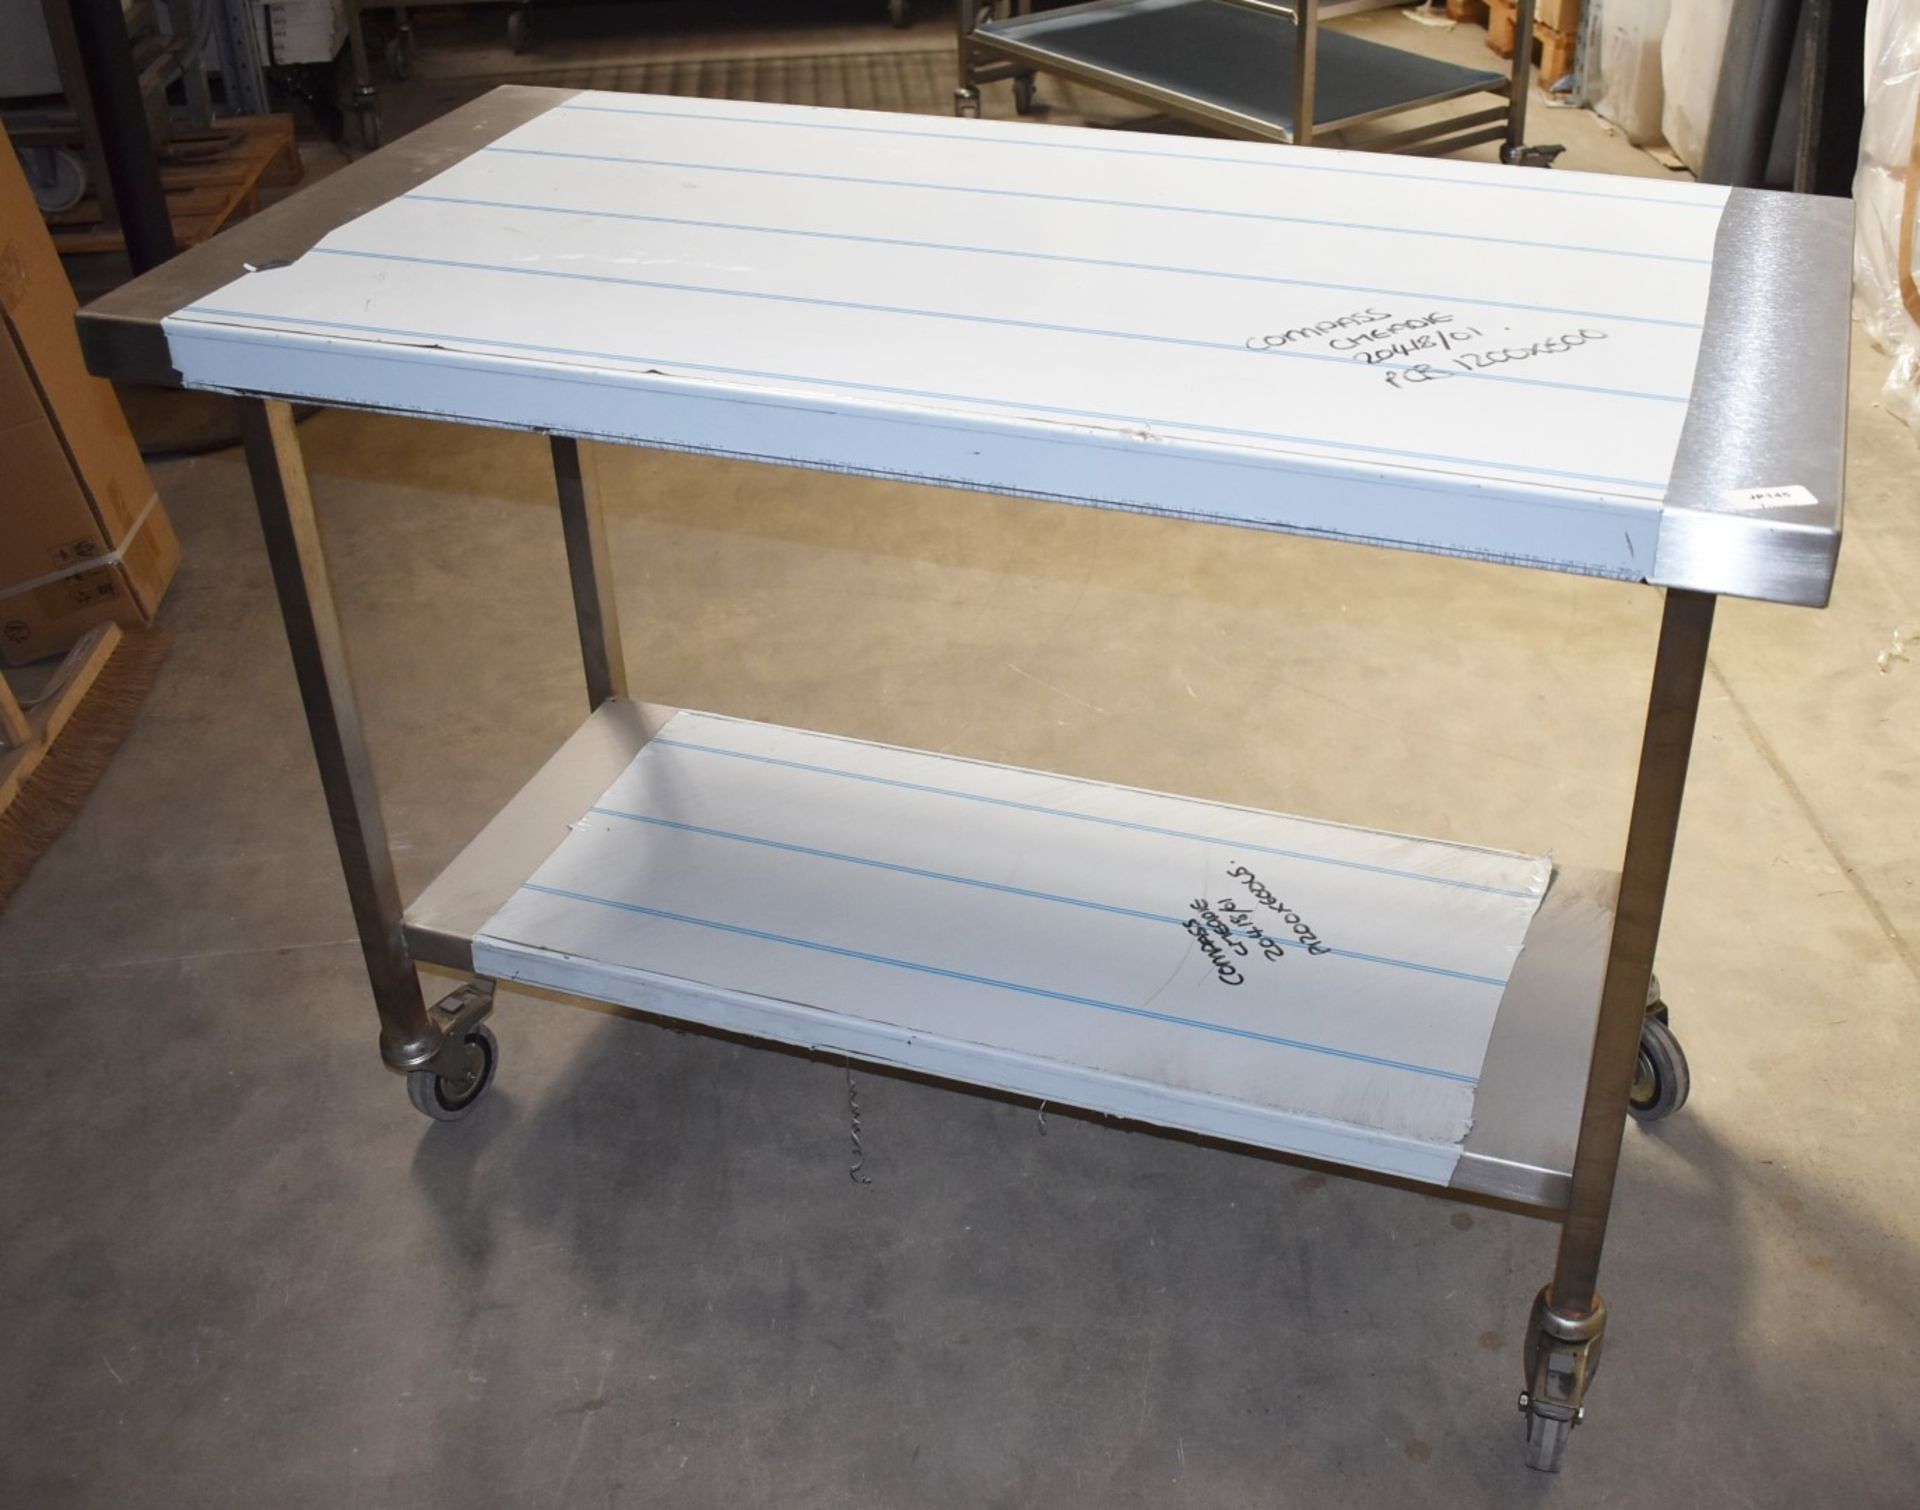 1 x Grundy Mobile Stainless Steel Prep Table With Undershelf - Size H85 x W120 x D60 cms - Ref JP145